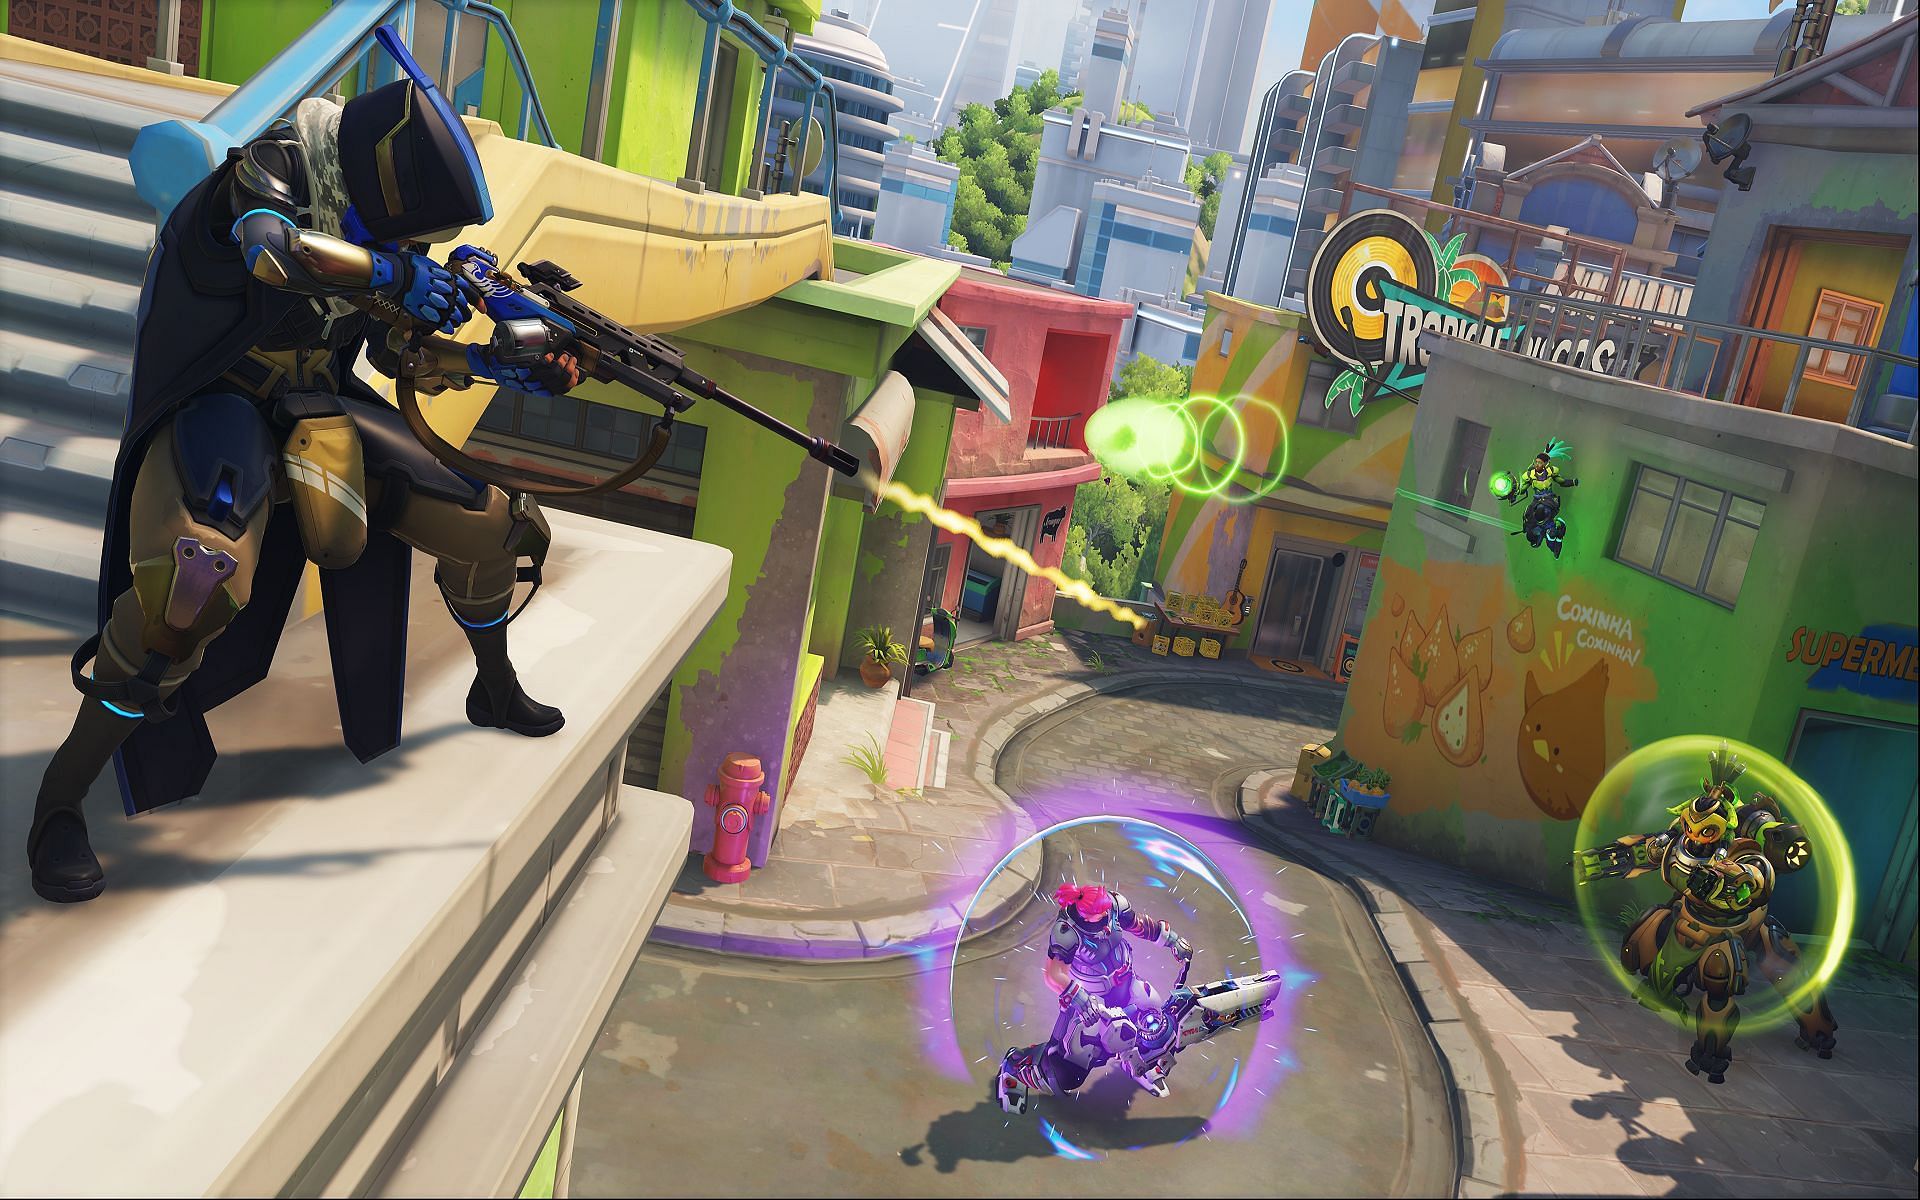 Best Custom Maps to Train Your Aim in Overwatch 2